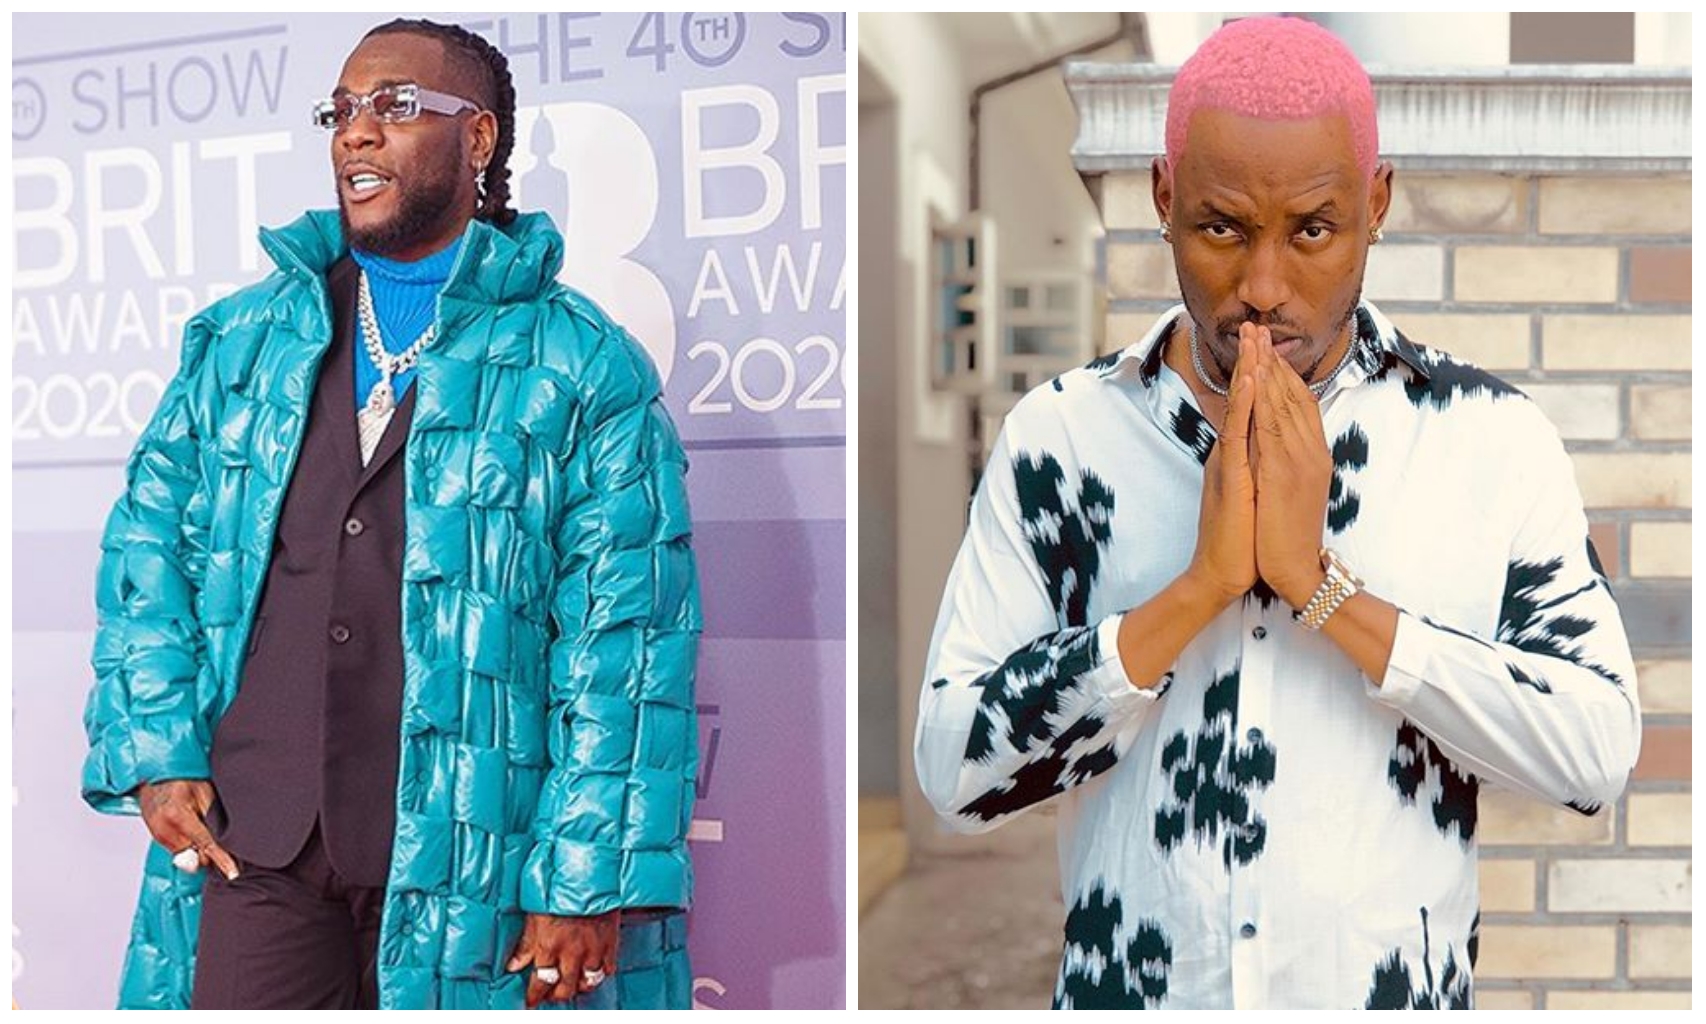 Burna Boy called out as a hypocrite on Twitter, 3 years after his drama with Mr. 2kay